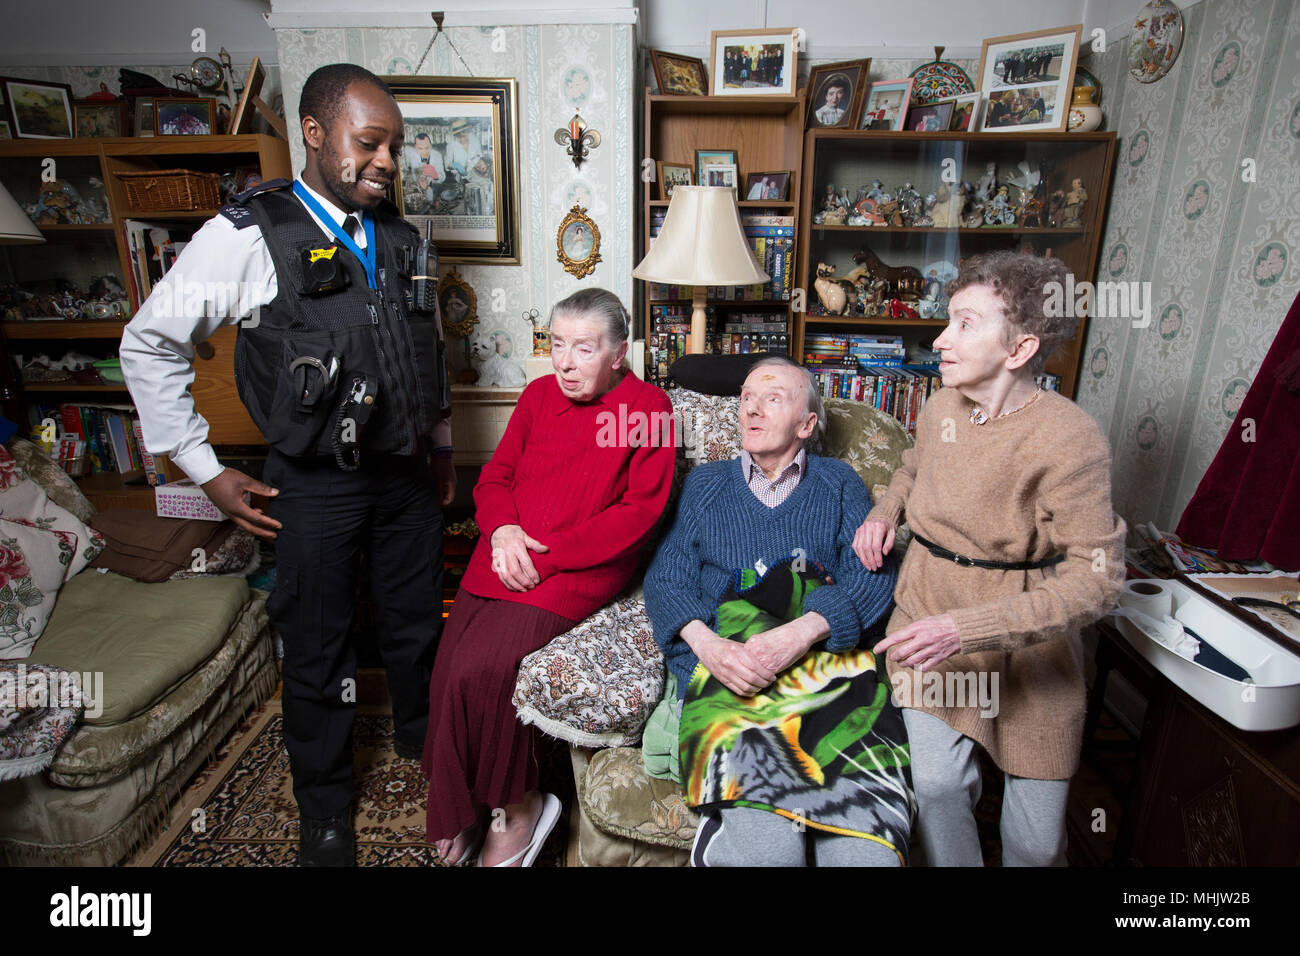 Three elderly siblings being visited by Metropolitan Police officers because they are too scared to leave their house because of burglars, London, UK Stock Photo